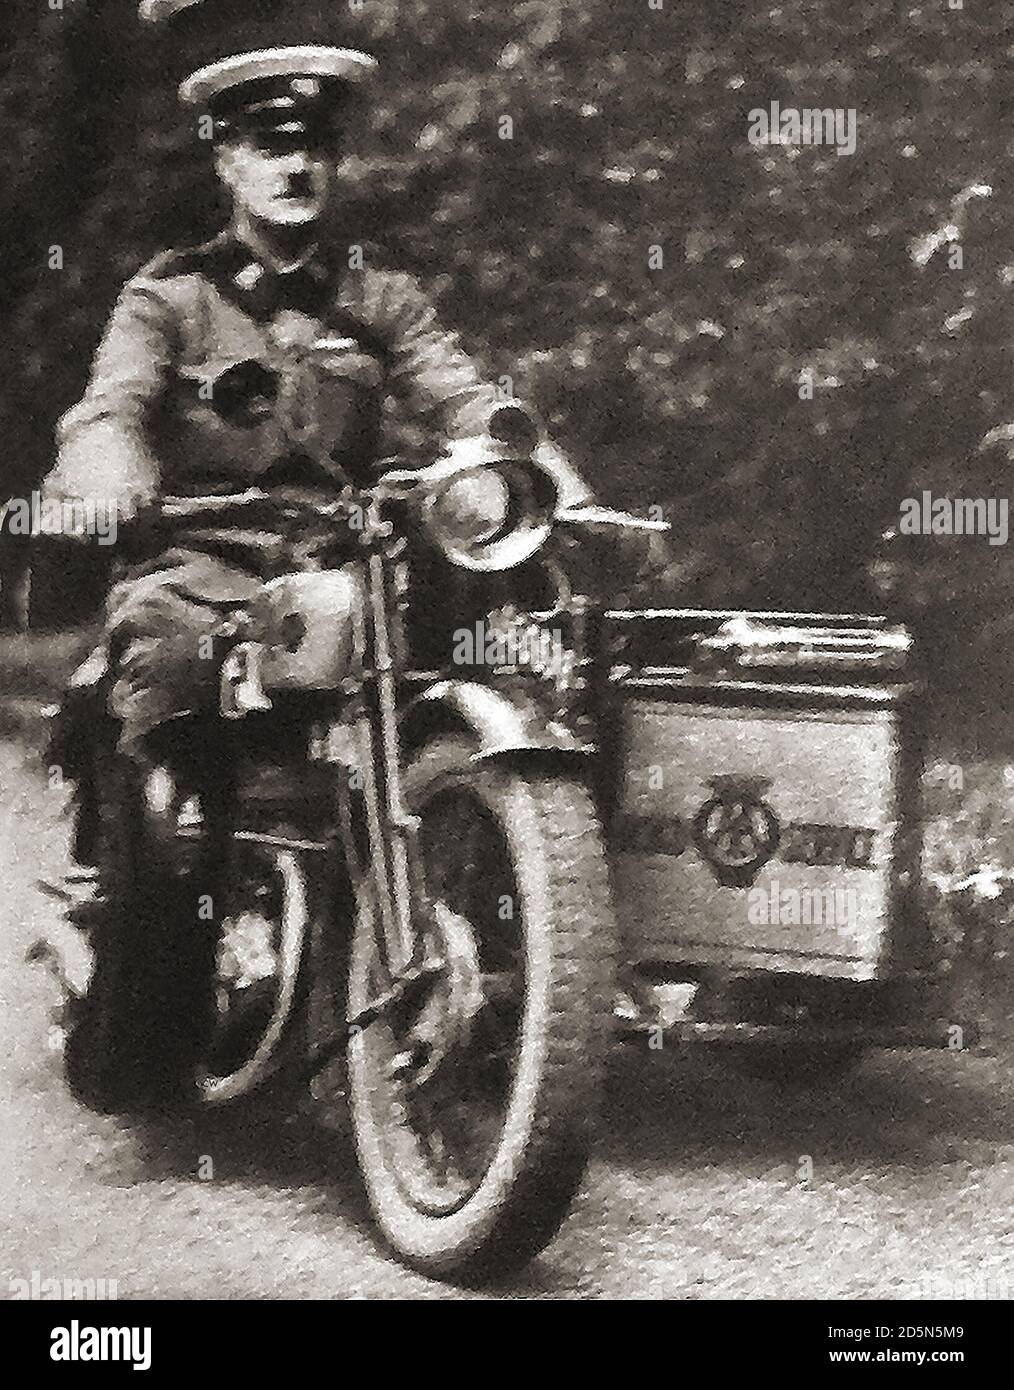 1932 (An old snapshot photo ) Uniformed motorcycle (mechanic) patrolmen replaced the old AA cycle Scouts. Historically on 19 June 1905, Charles Jarrott and Walter Gibbons, Charles Jarrott, Ludwig Schlentheim & Alfred Harrismet met at the Lyons Trocadero Restaurant in Shaftesbury Avenue, London ,to form the 'The Motorists' Mutual Association', (MMA).Just a week later, on 26 June, the MMA committee changed its name to The Automobile Association. Stock Photo